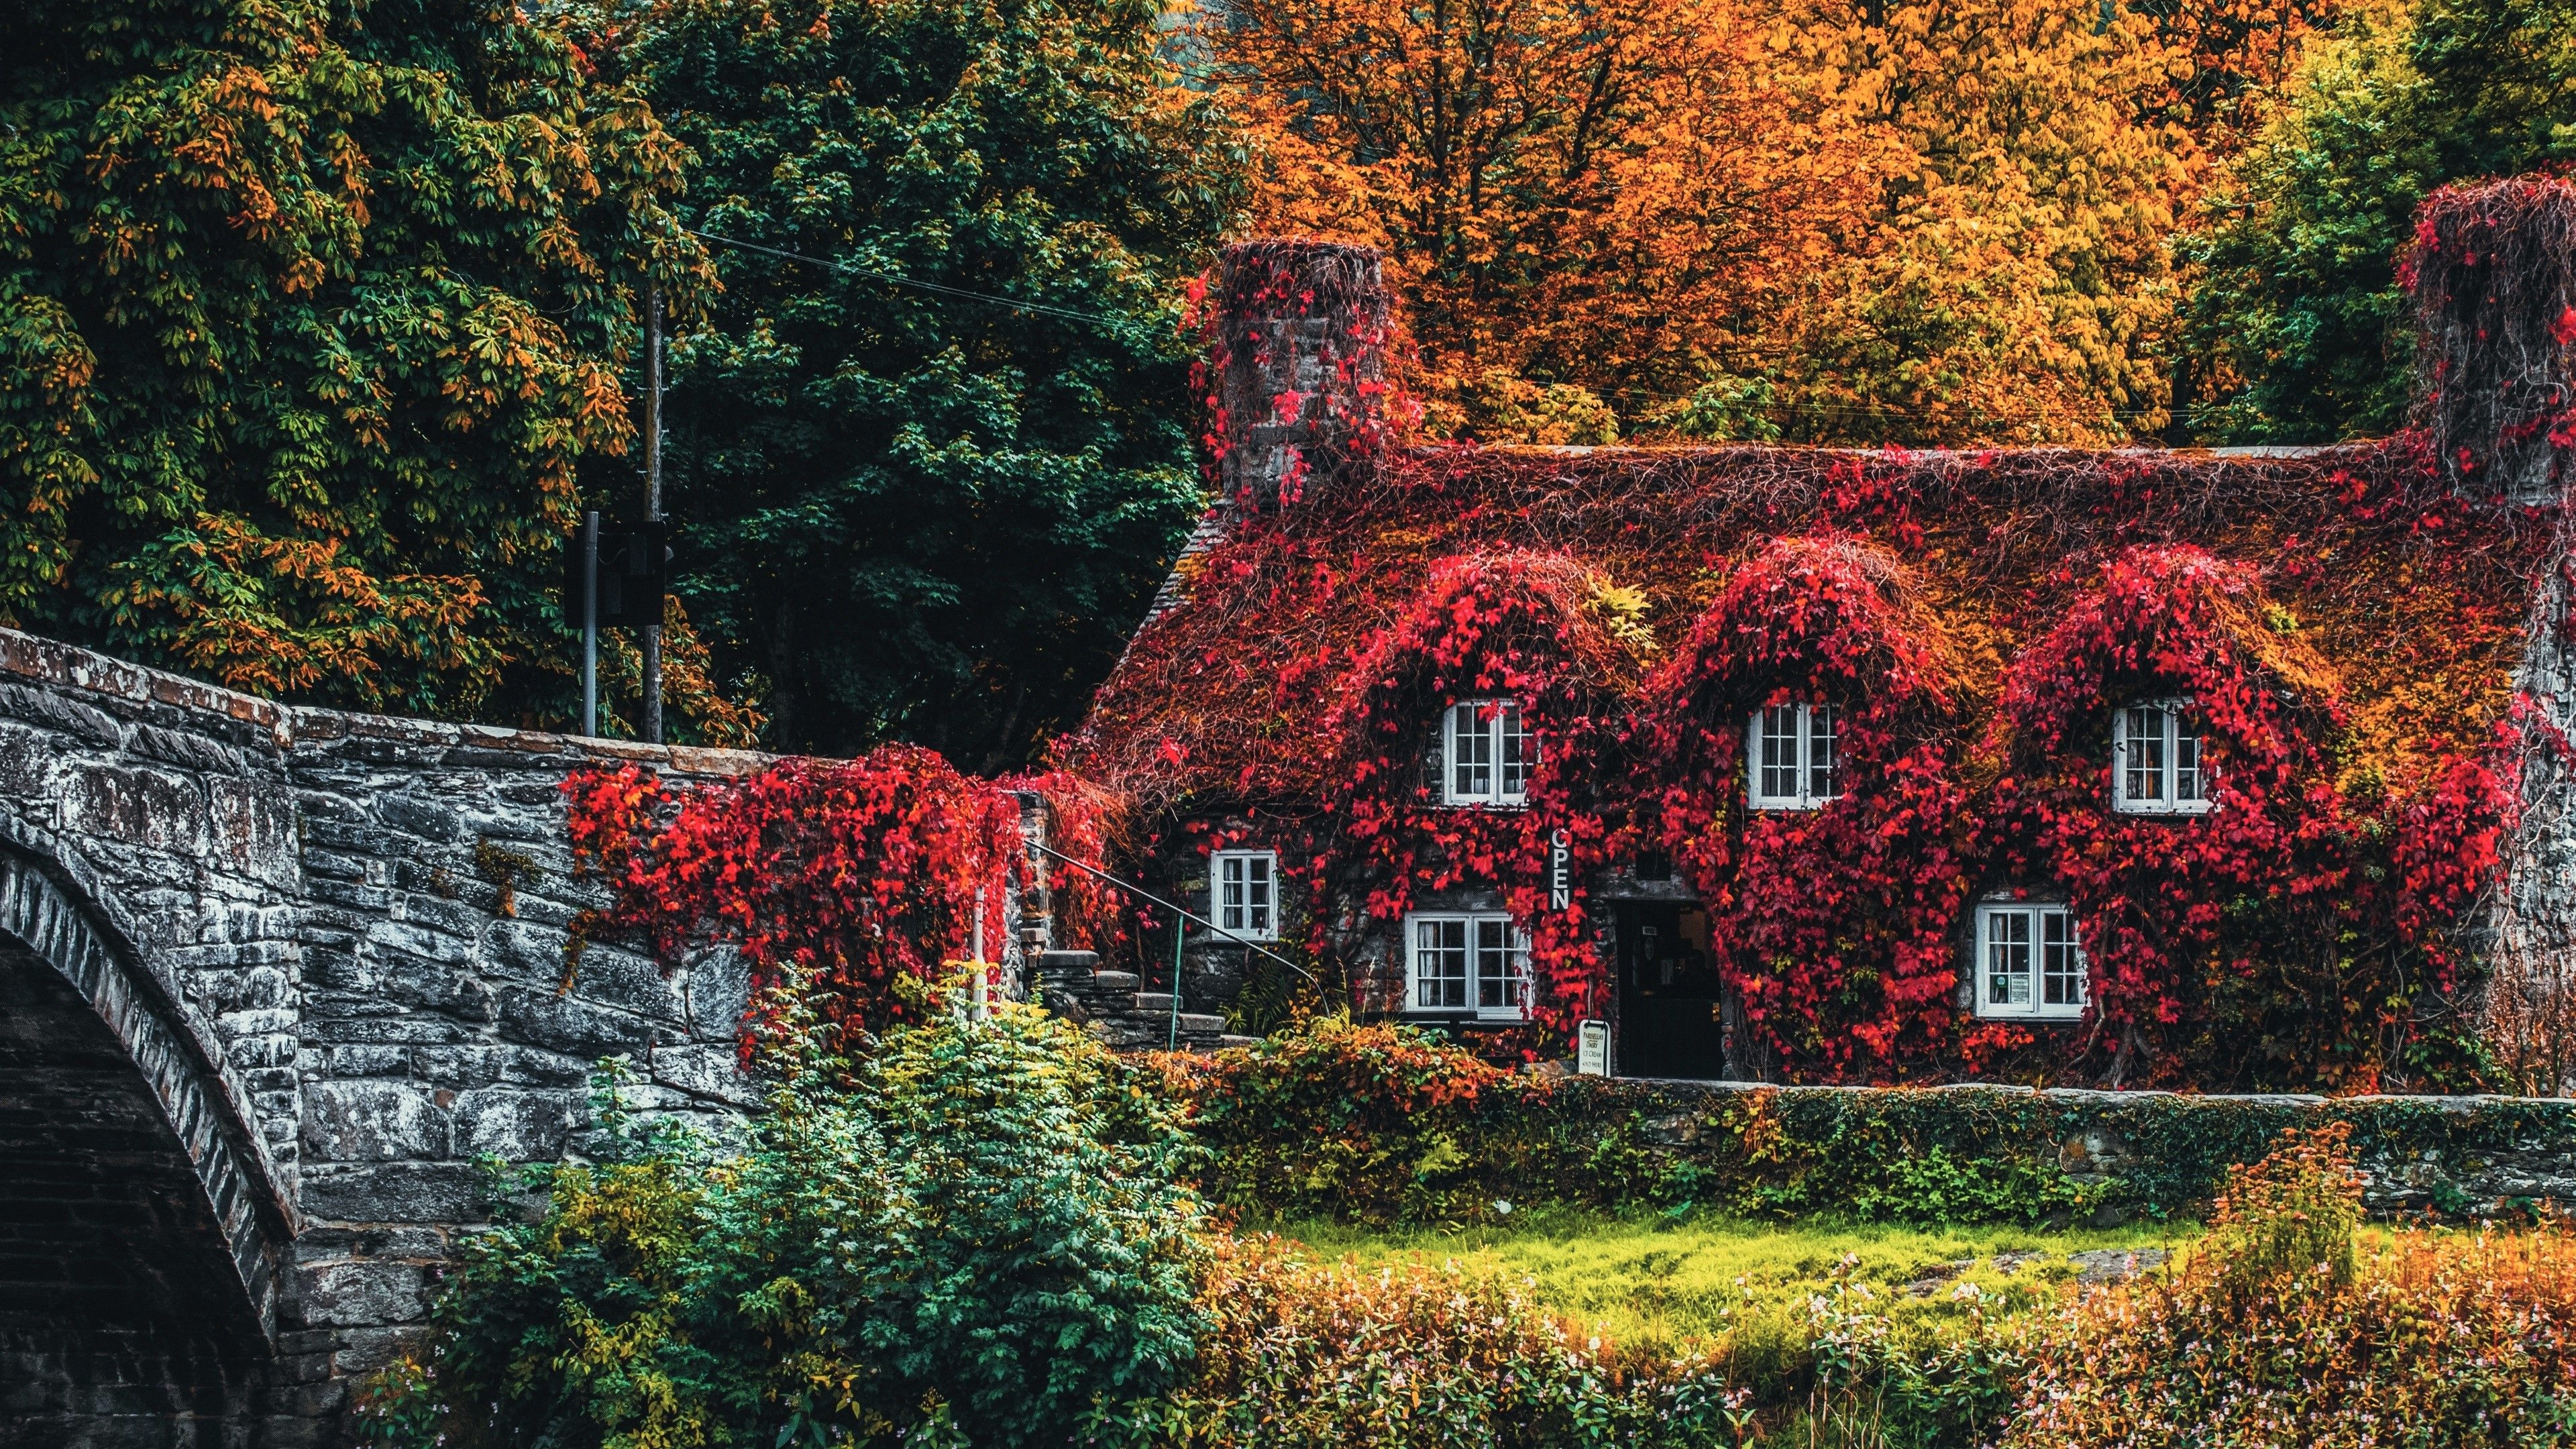 Ivy Covered House In Wales In Autumn 4k Ultra HD Wallpaper